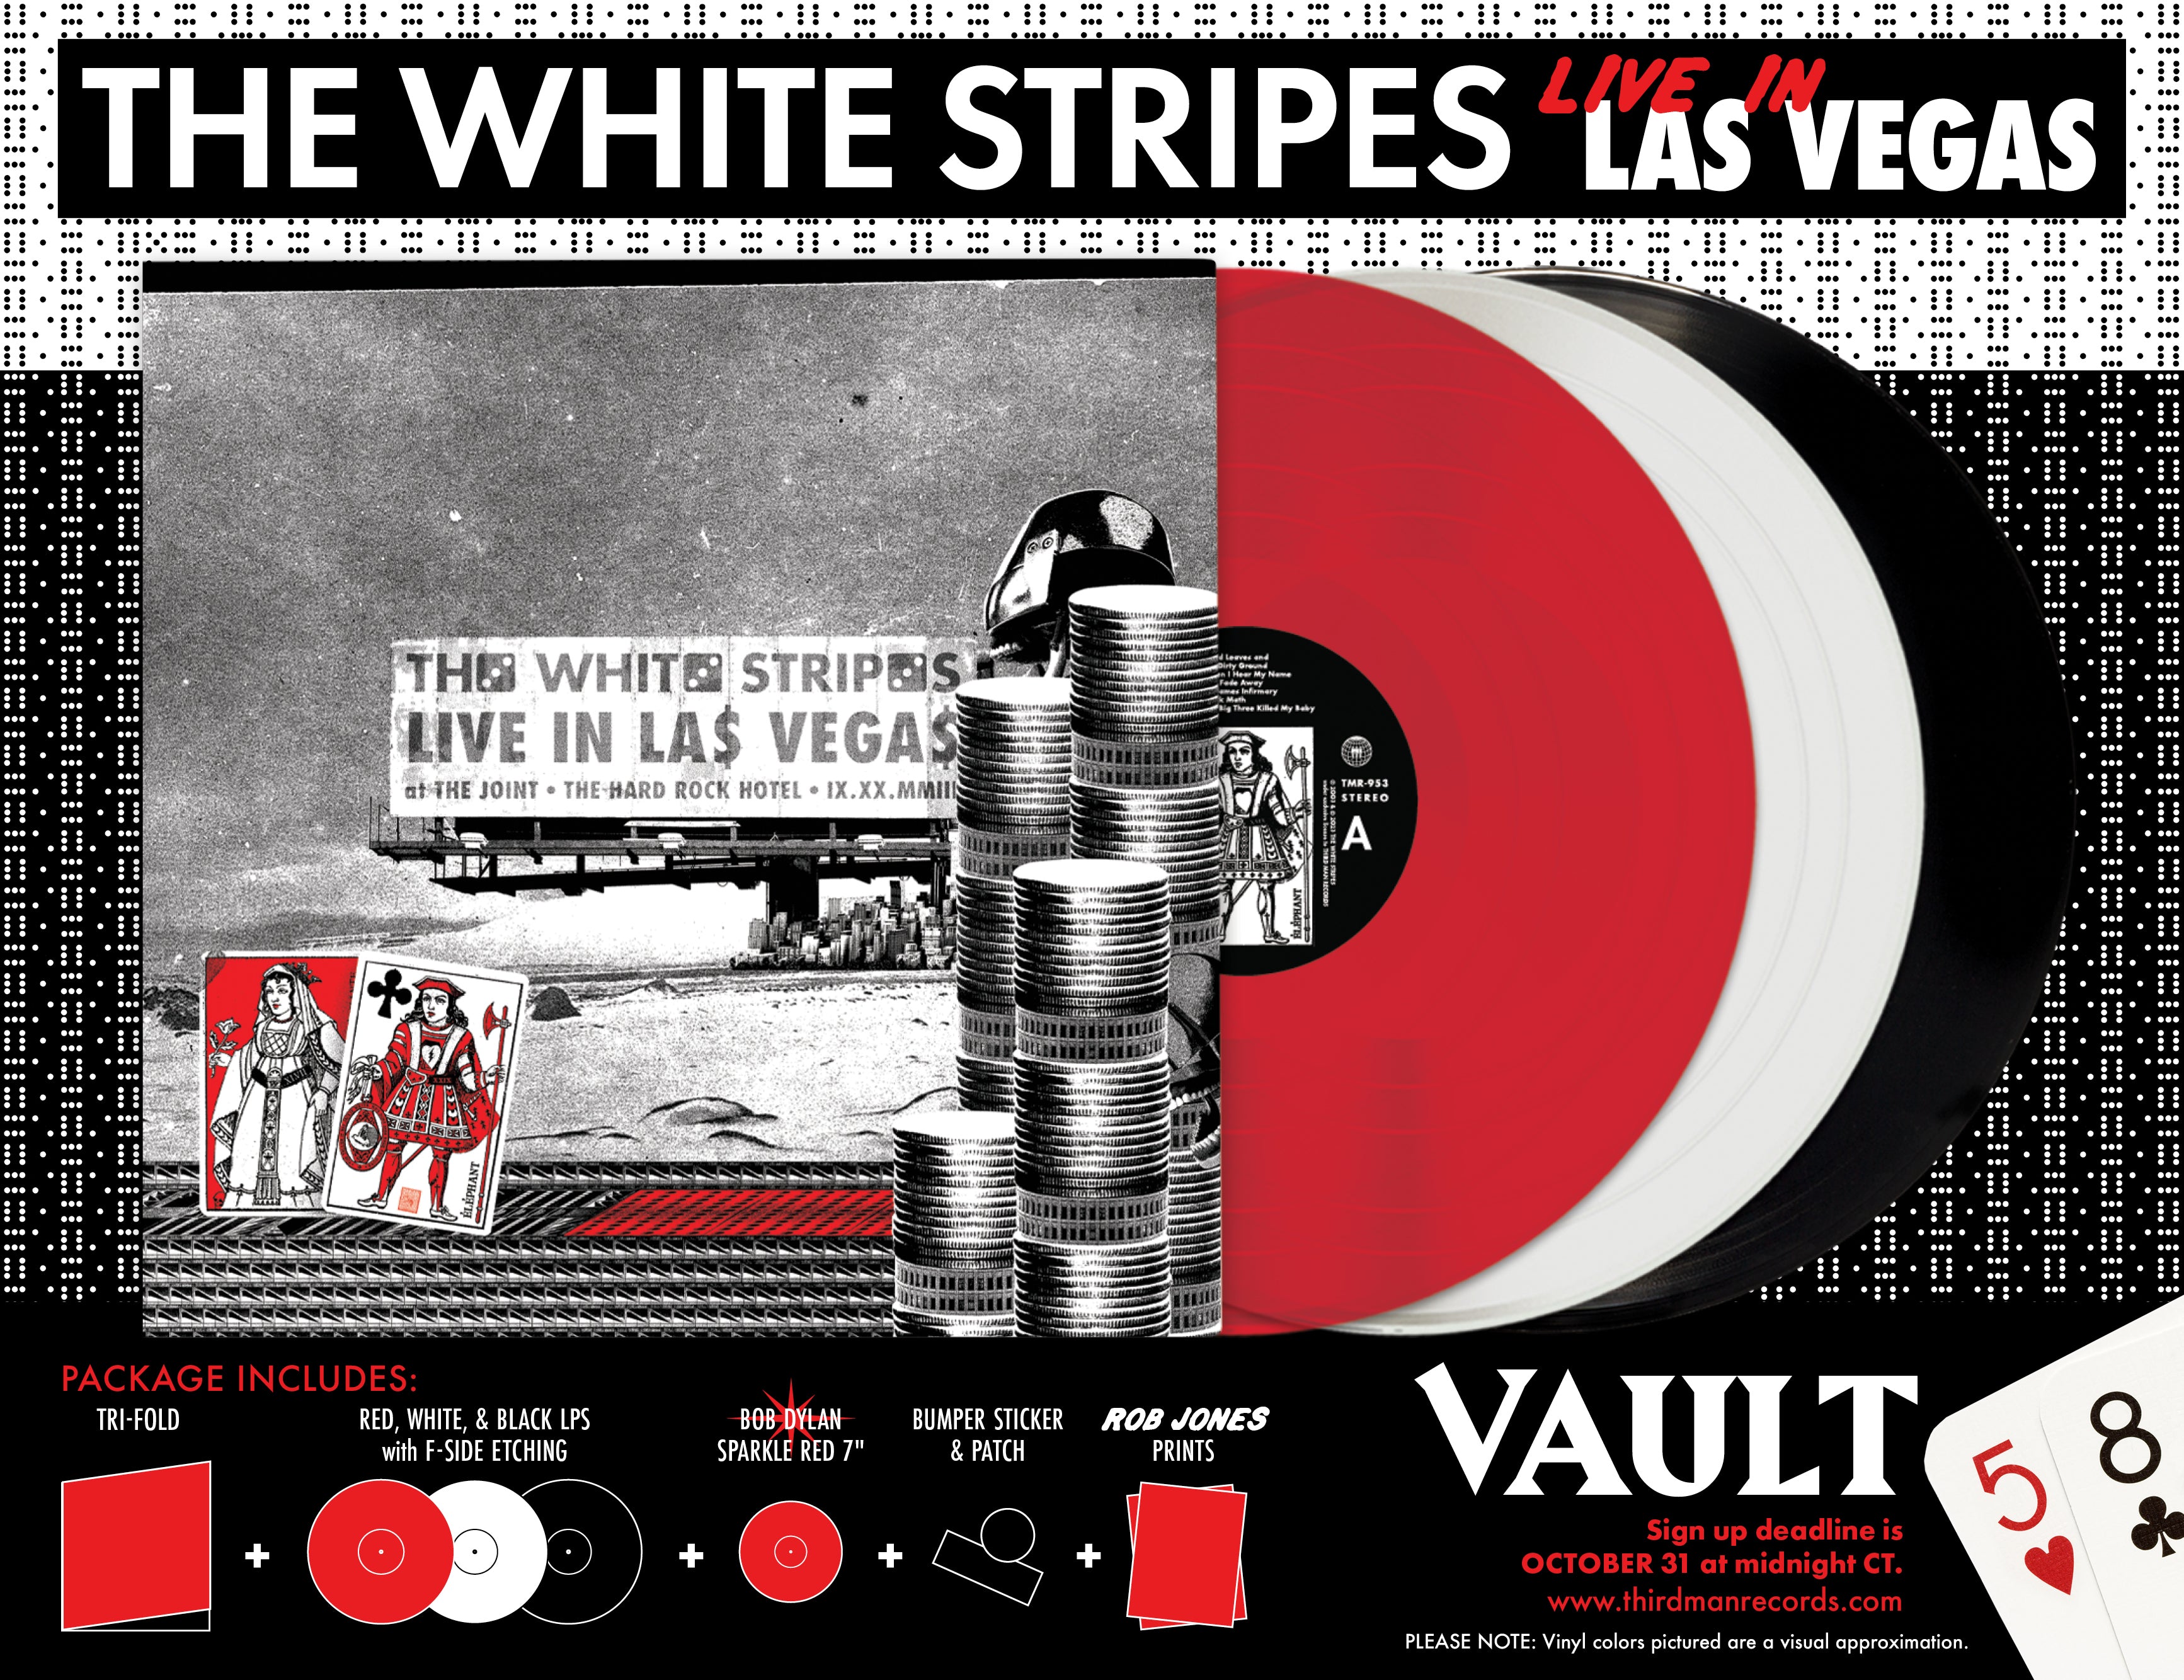 THIRD MAN RECORDS ANNOUNCES VAULT PACKAGE #58: THE WHITE STRIPES 